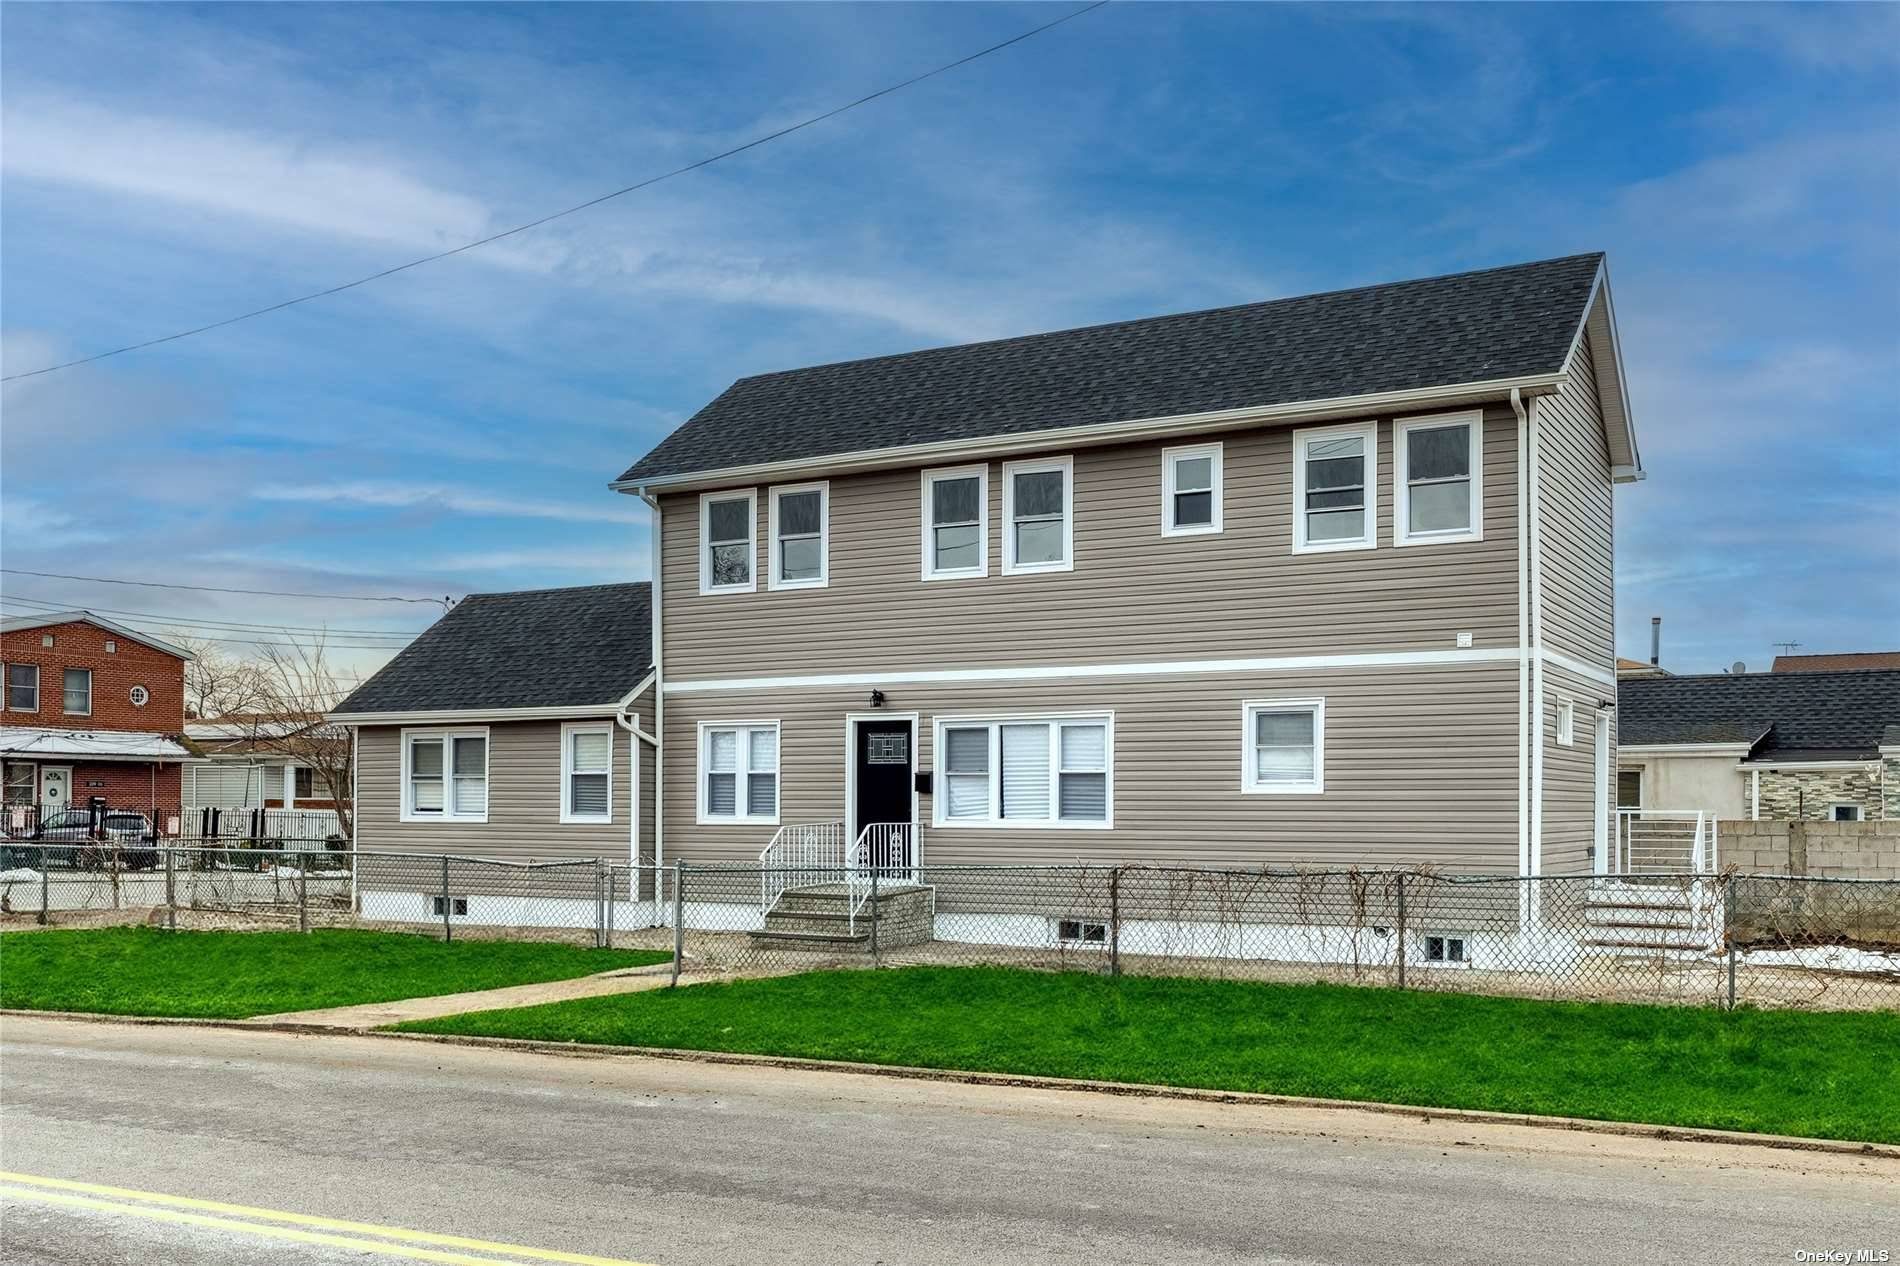 Huge fully renovated 1 family 4 bedrooms 3 full bath 2 kitchens marble countertop stainless stainless steel appliances finished 1 bedroom basement rental unit with separate entrance.